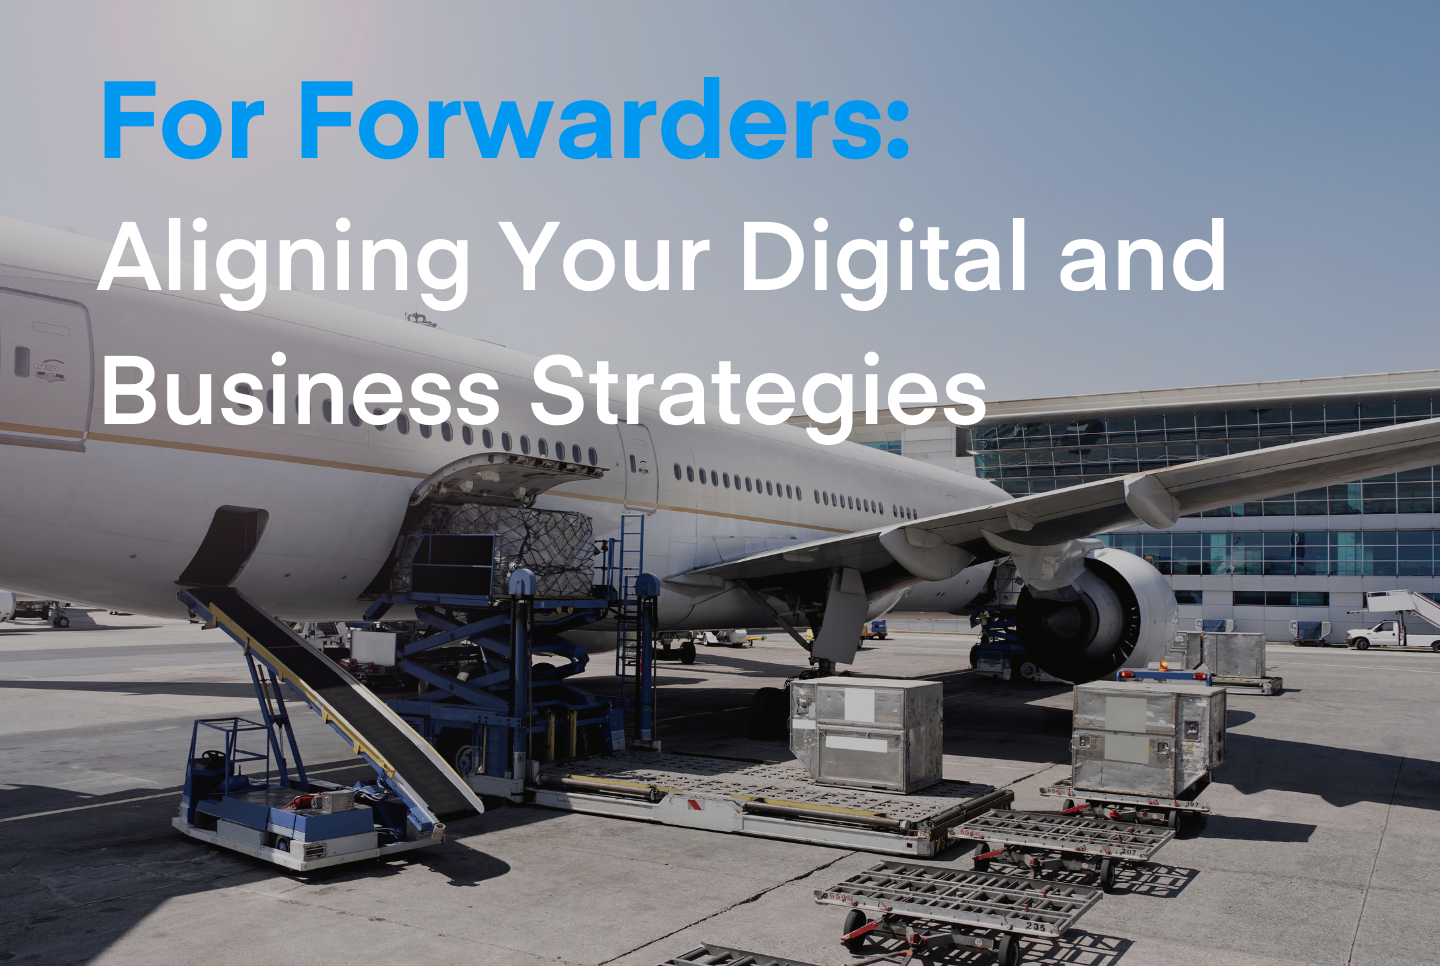 How Freight Forwarders can align their supply chain digitization and business strategies